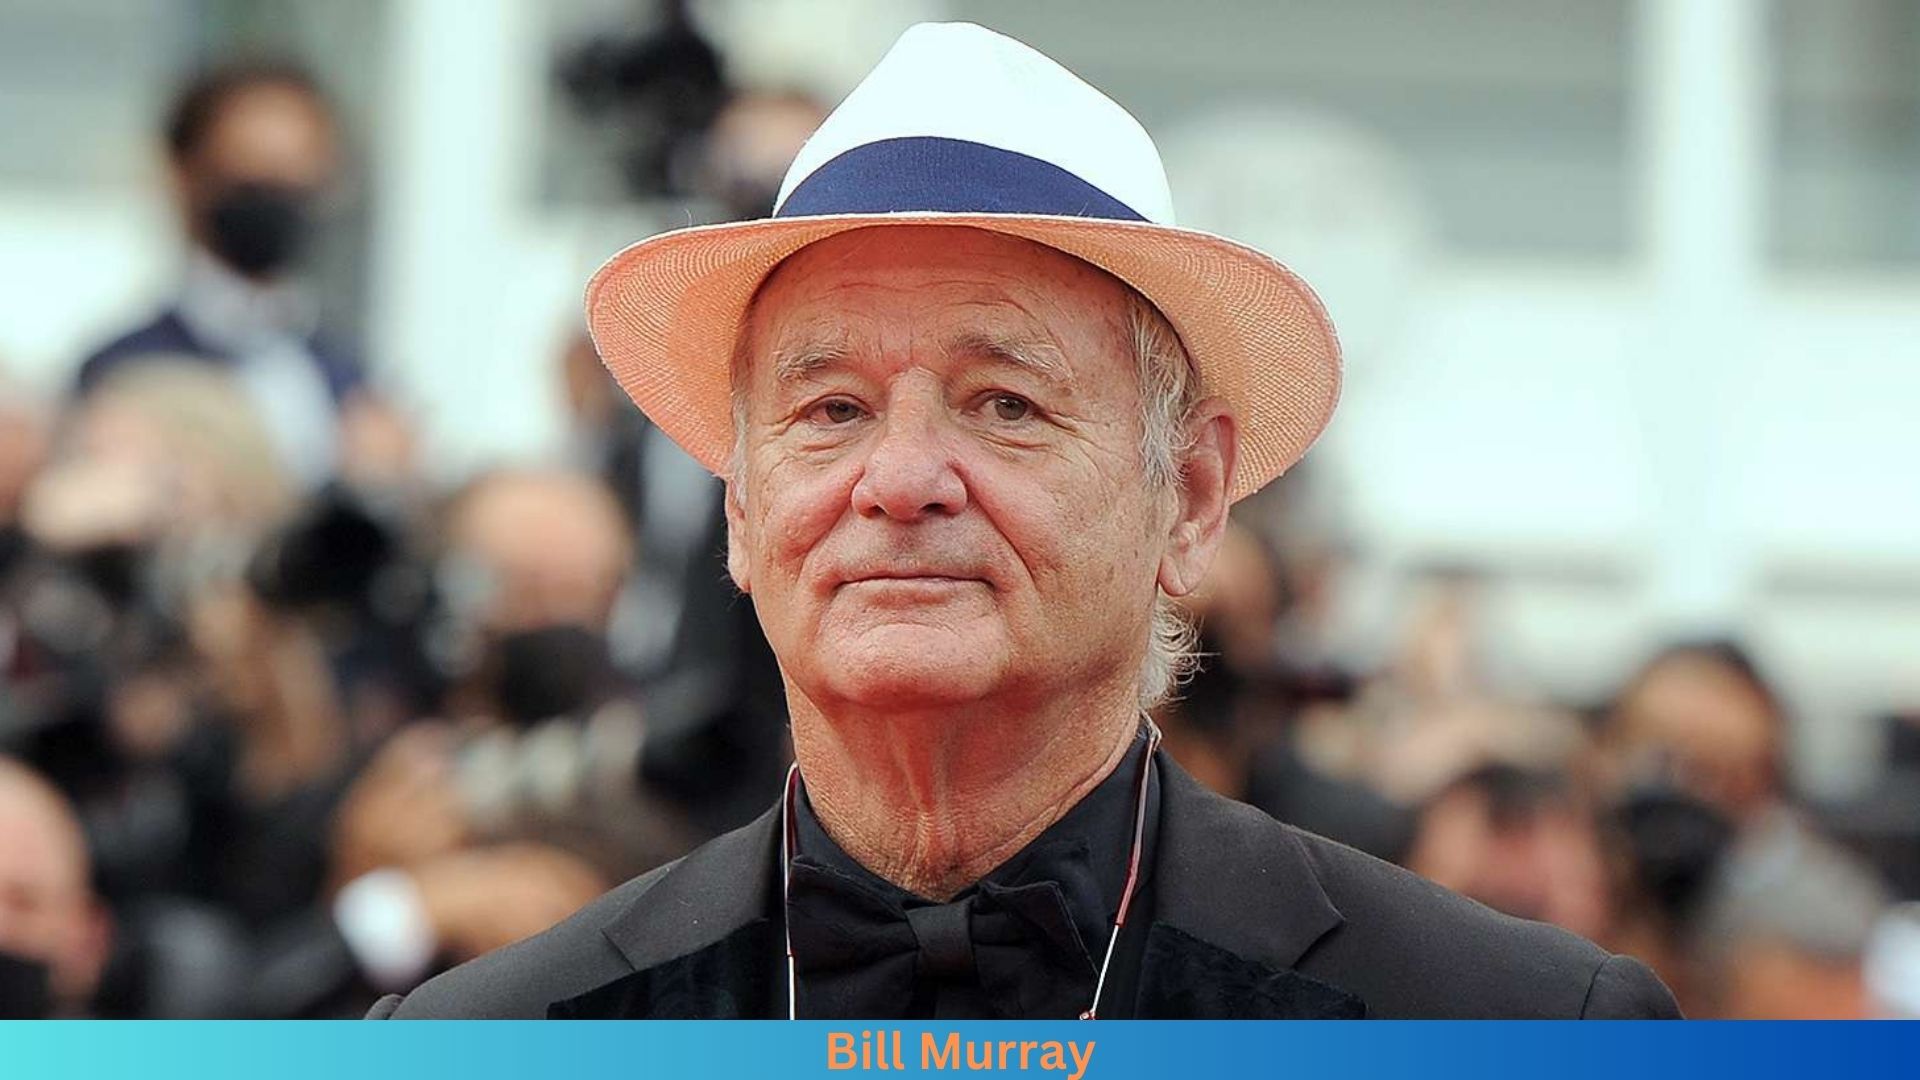 What is the Net Worth of Bill Murray?